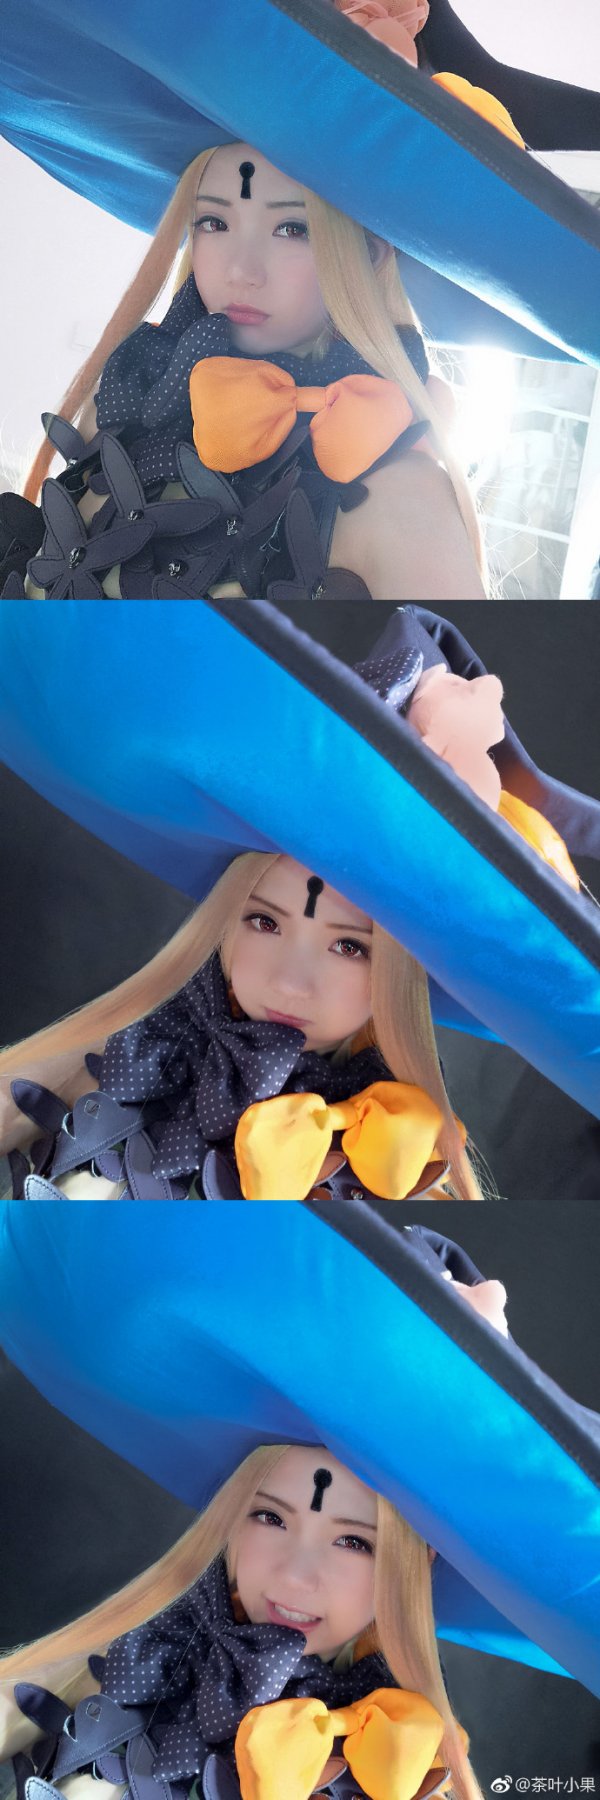 Abigail Williams Cosplay by Chaye Xiao Guo